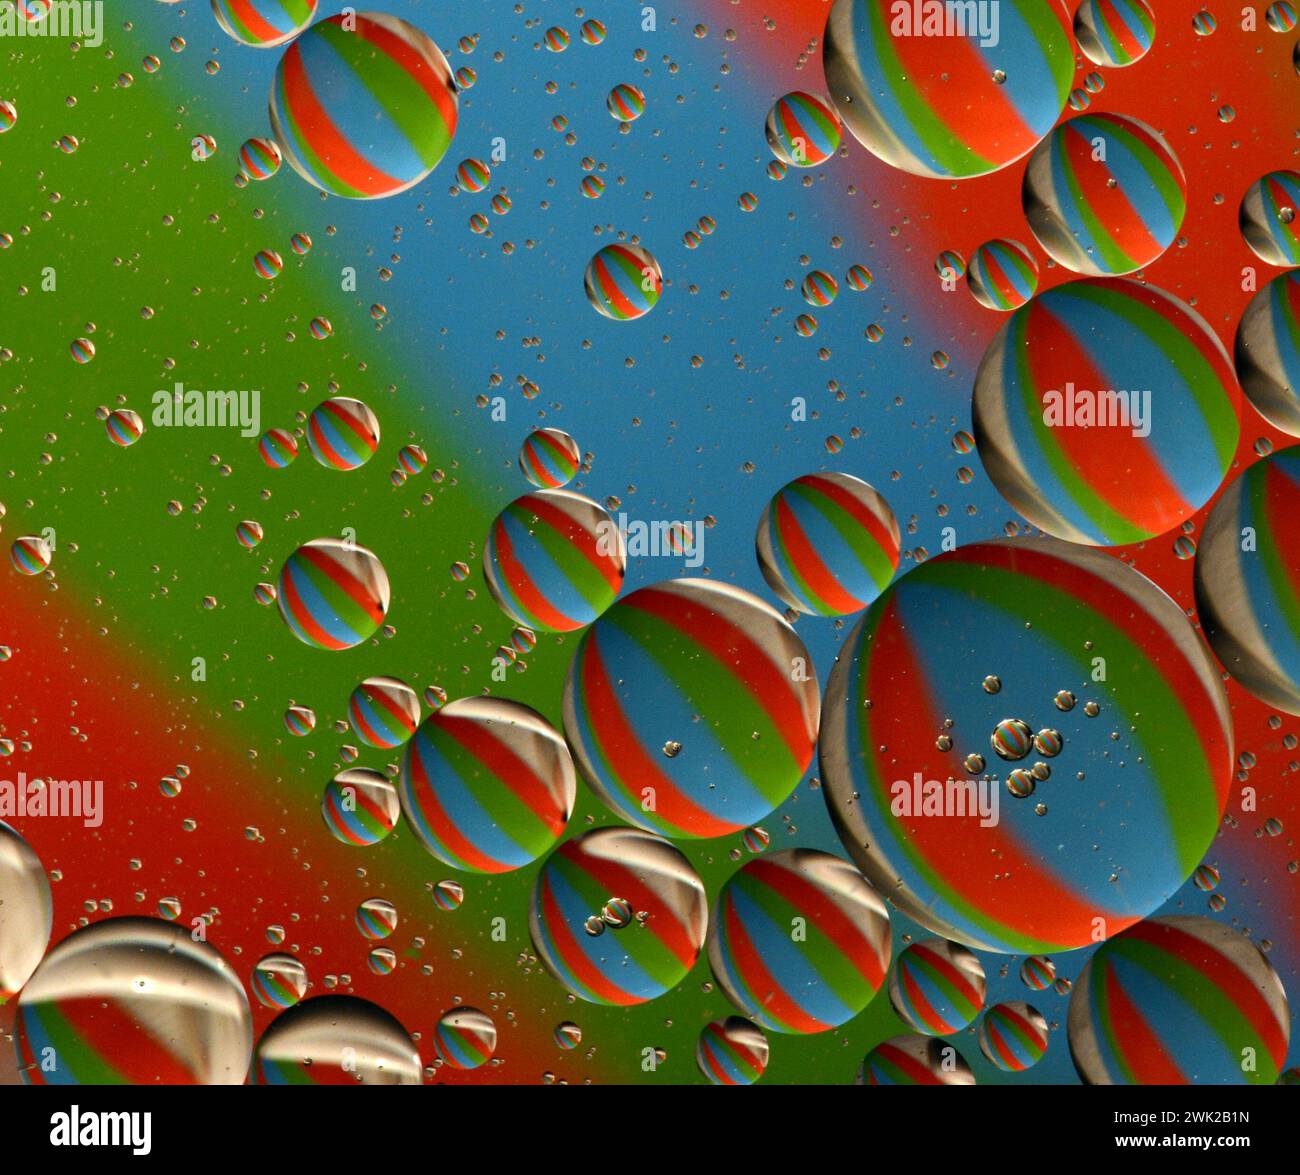 Abstract oil bubbles on water with colorful reflections and patterns. Abstract background. Abstract screensaver. Abstract artwork. Stock Photo